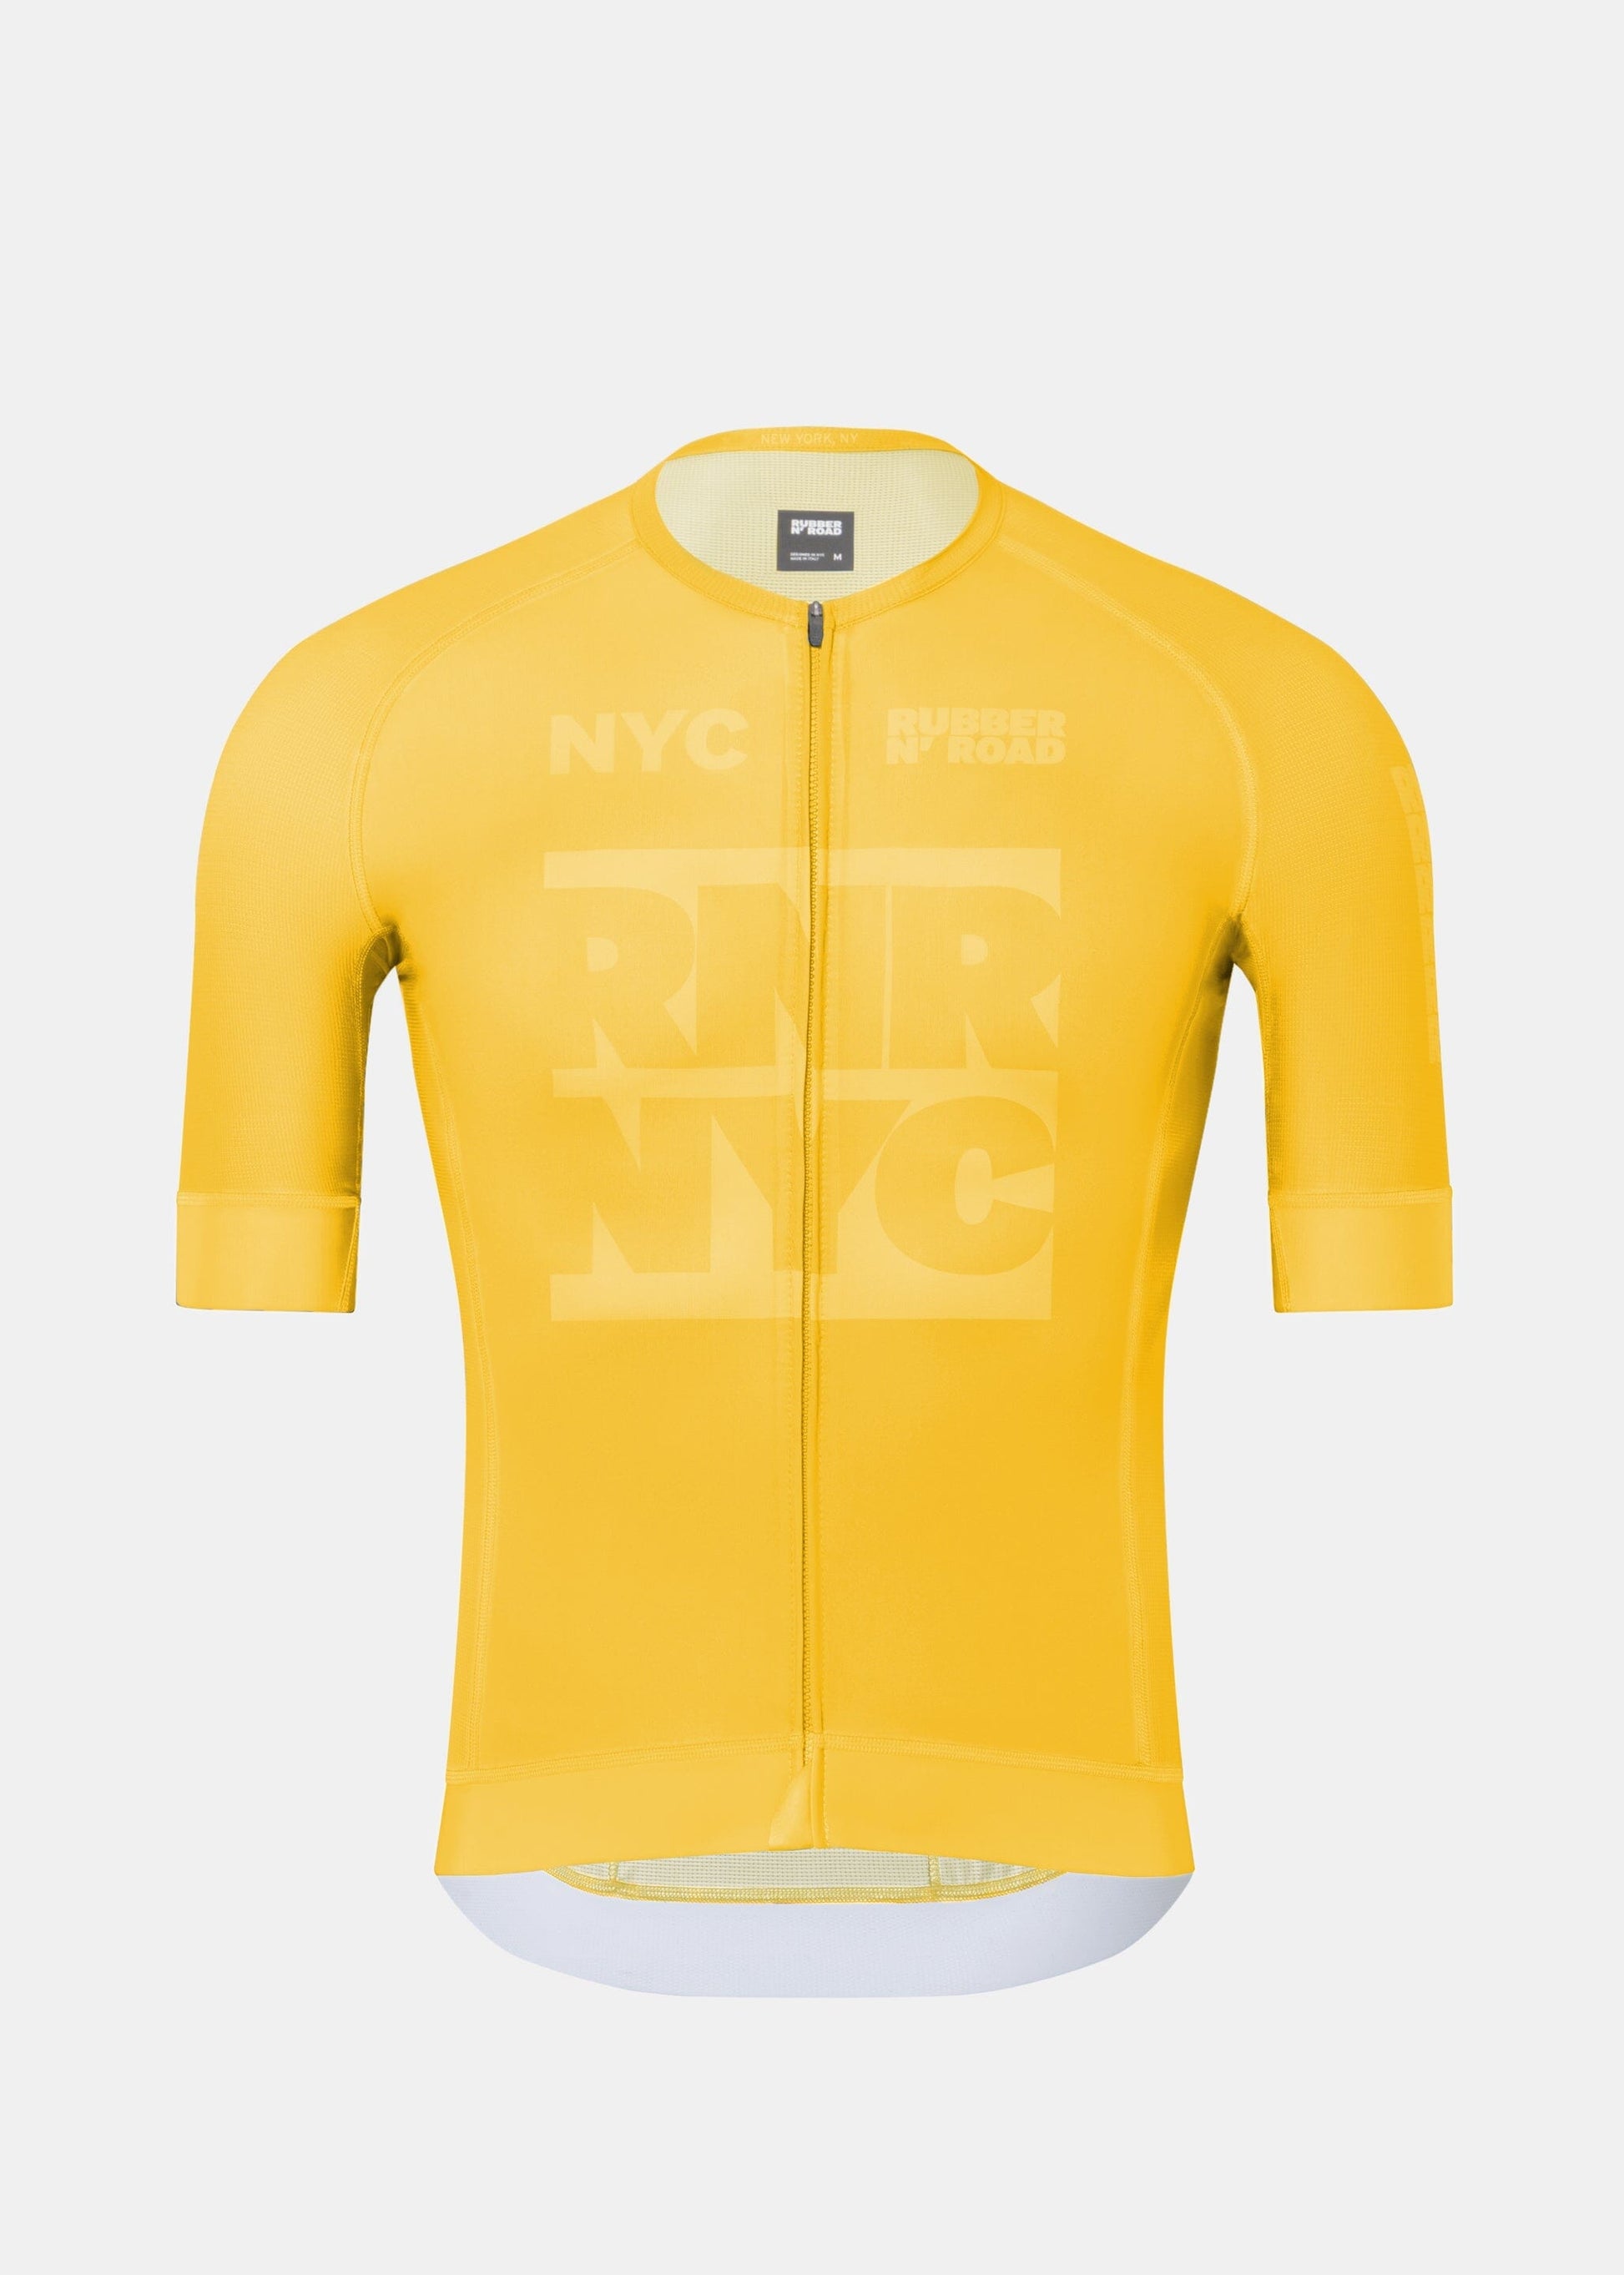 Rubber N' Road - Jersey Shadow Maillots Rubber N' Road Yellow S 